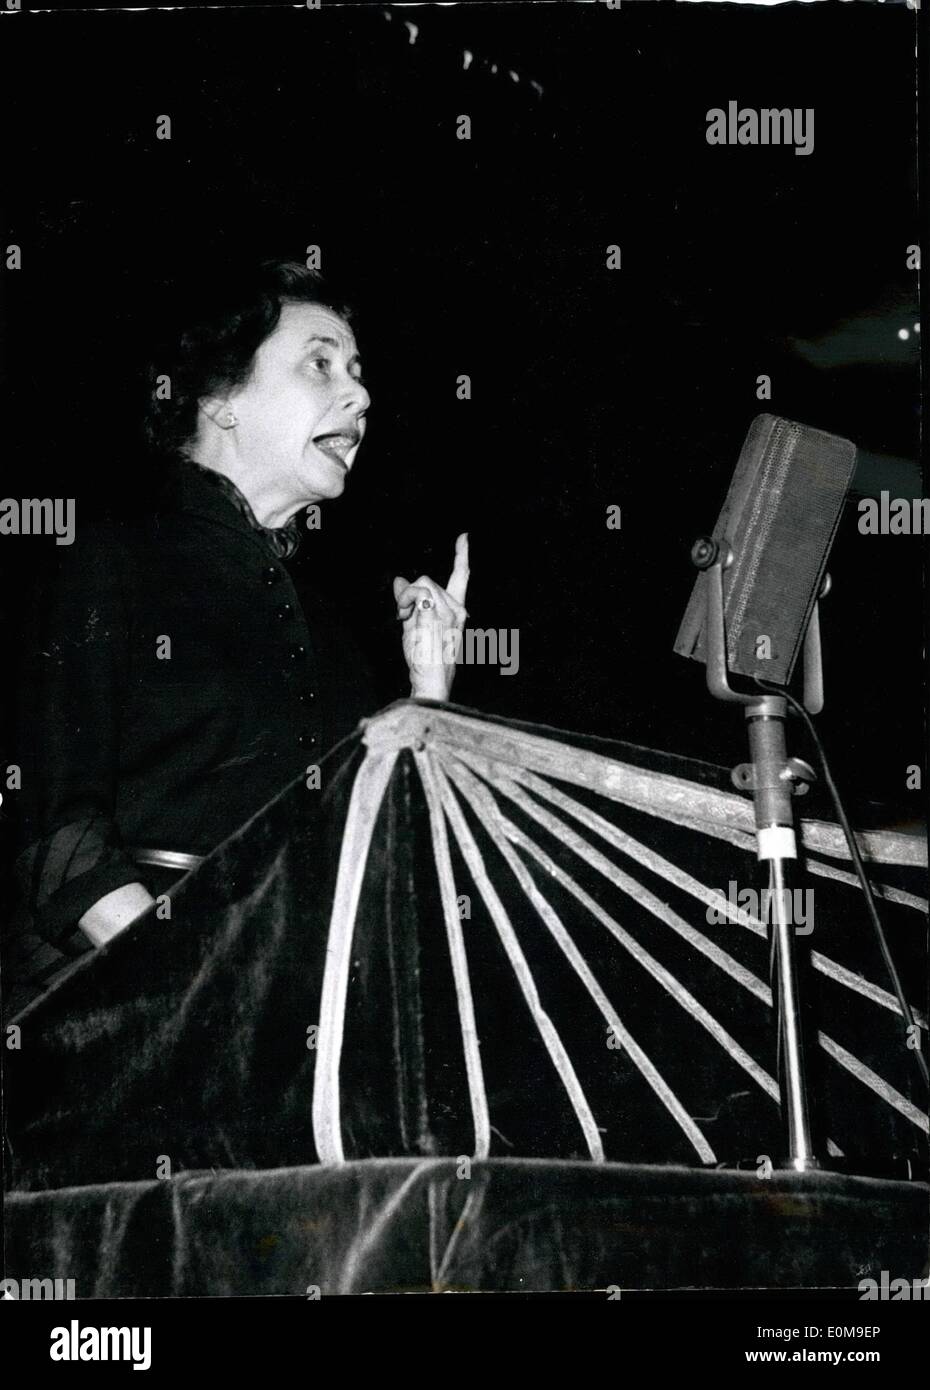 Mar. 03, 1954 - French Radical Party Hold Congress in Paris: MME Thomas-Patenotre, prominent member of the French Radical Party, Addresses the meeting held by the radicals at the Salle Wagram, Paris, today. Stock Photo